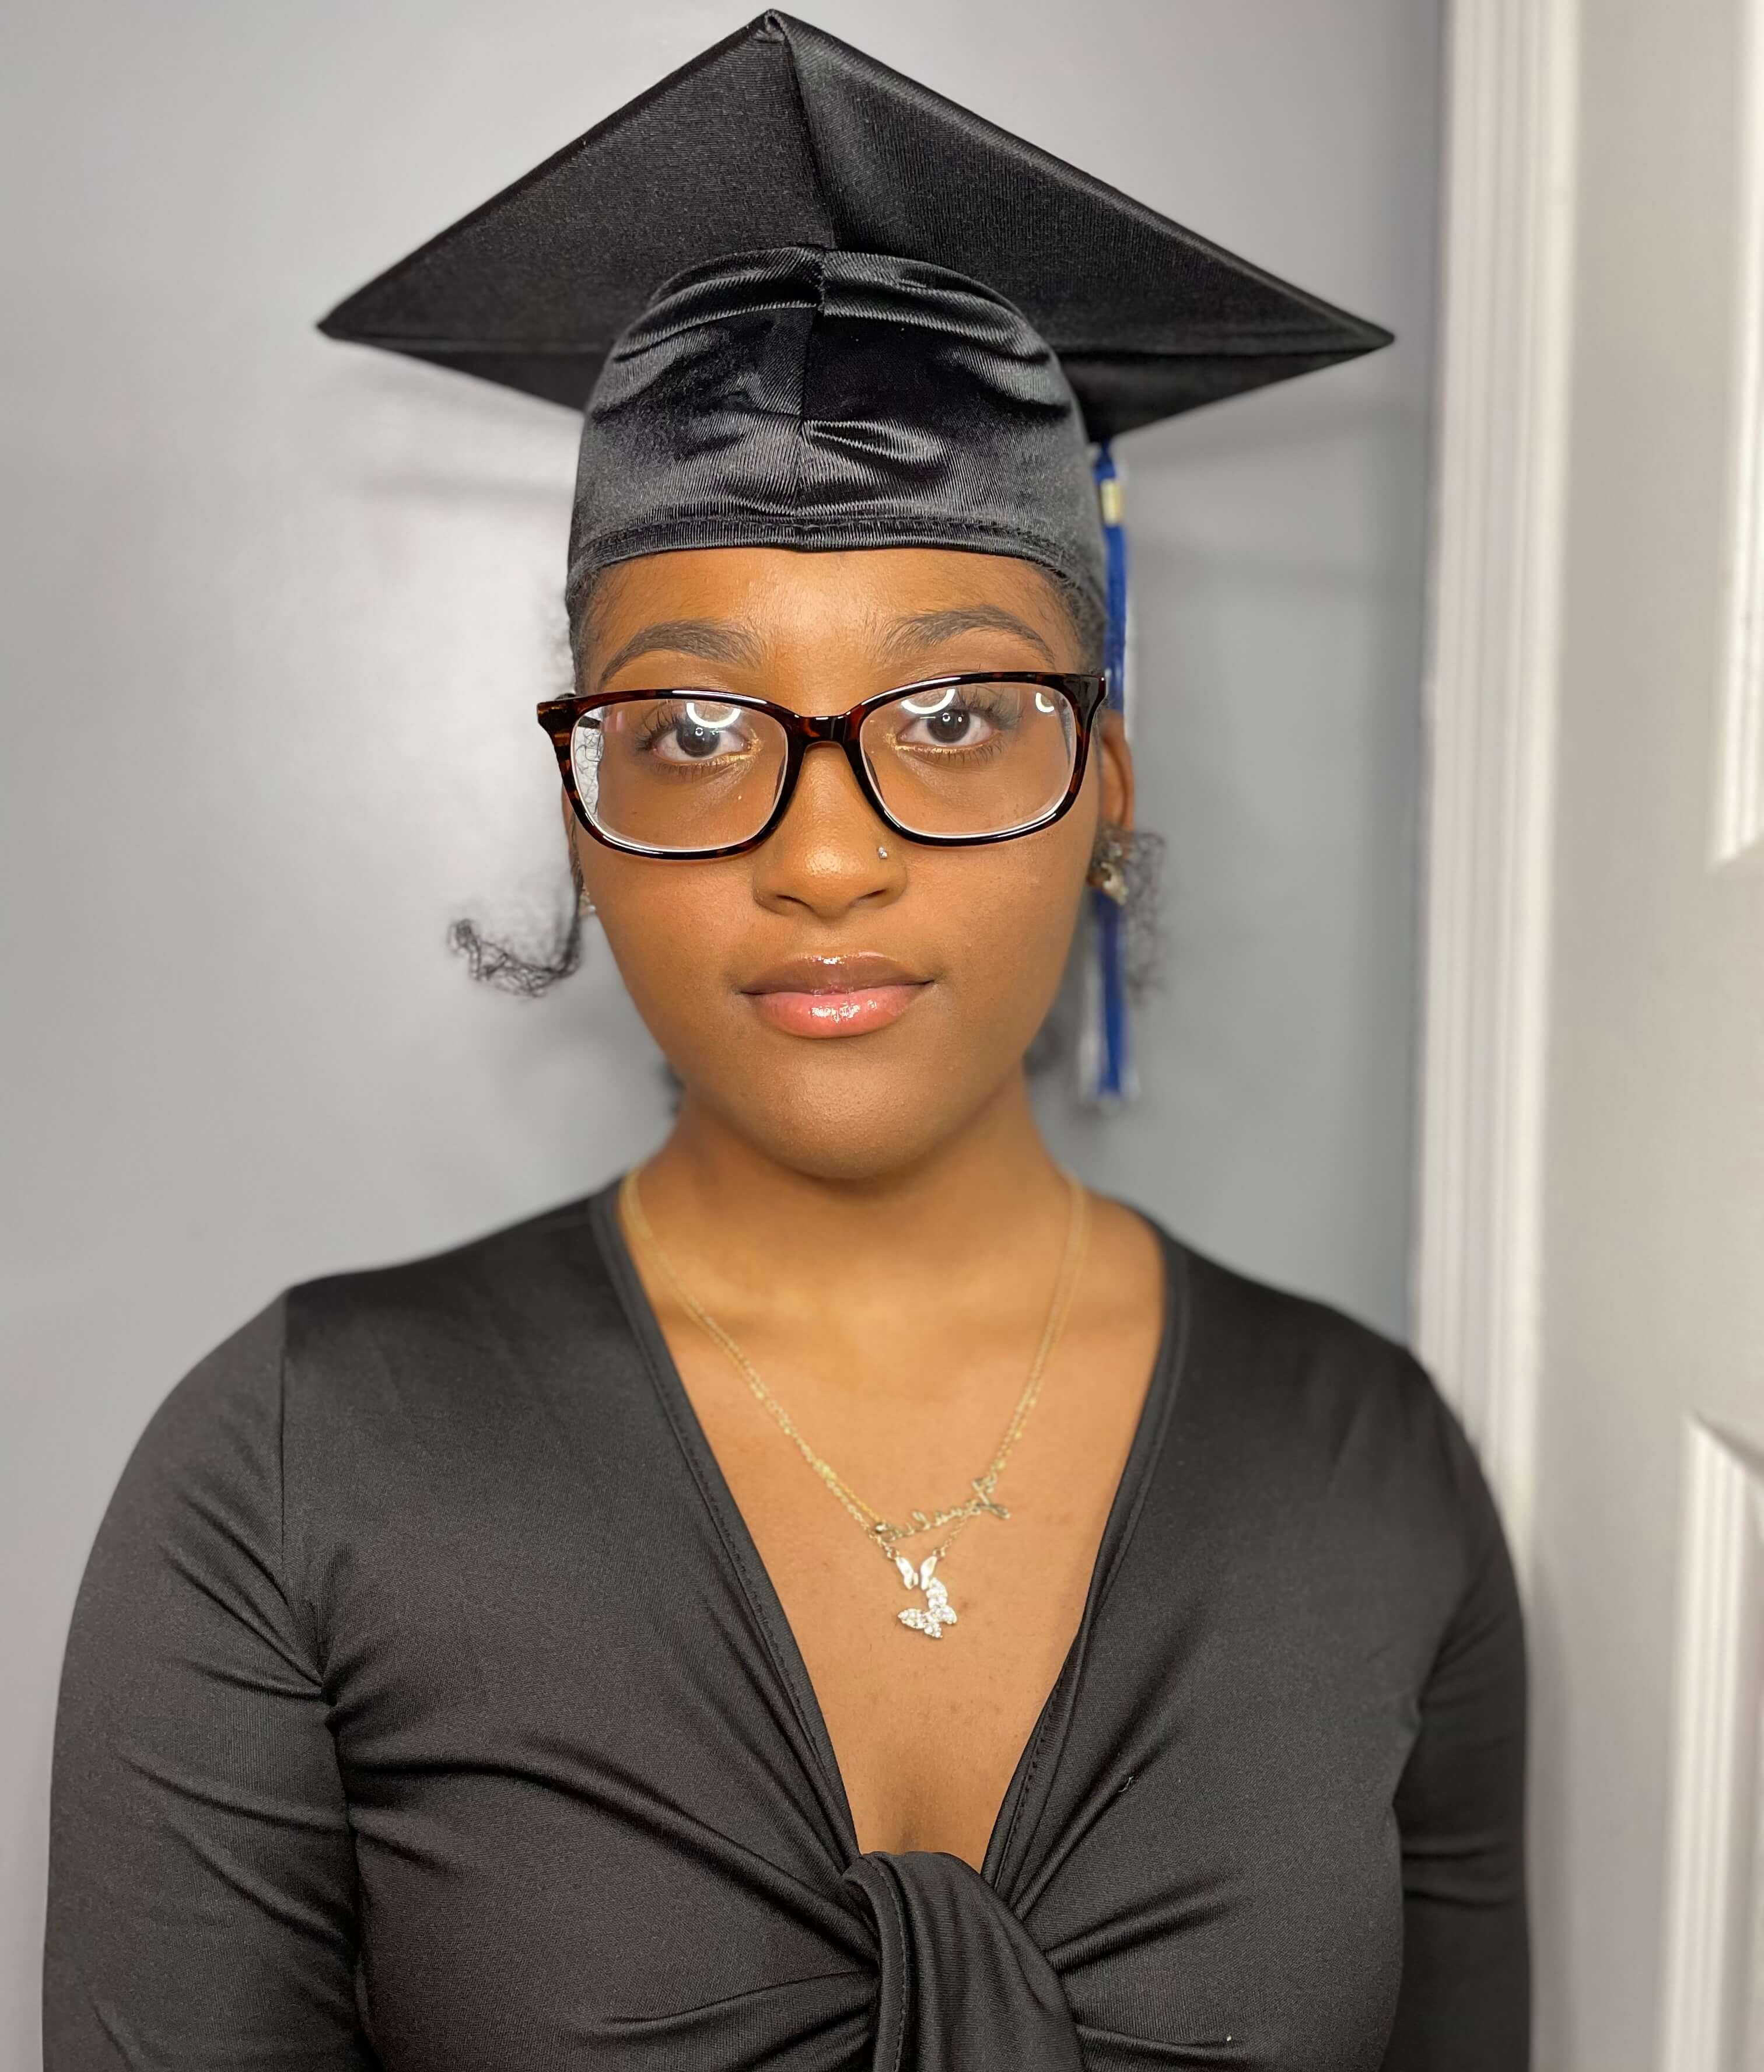 Image of Jevalia J. Llewellyn, QCC Commencement 2021